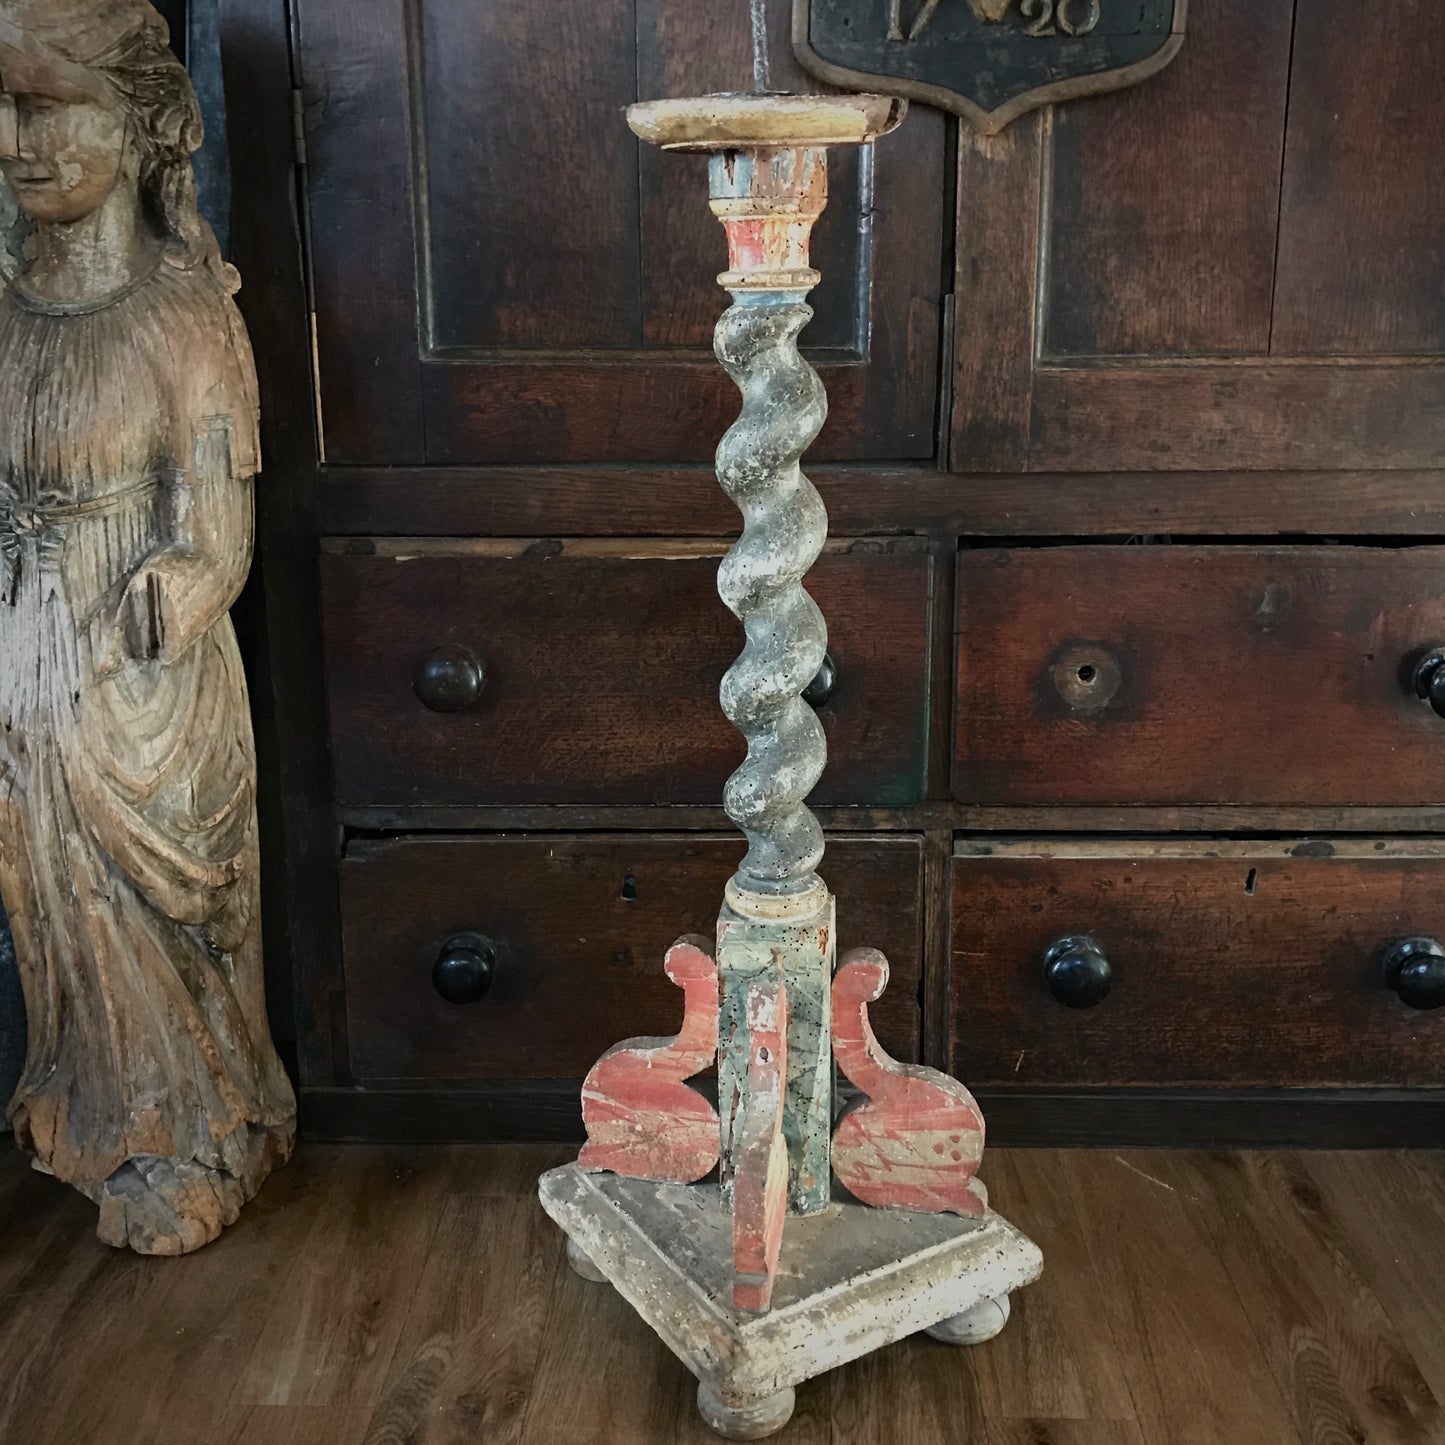 Large Italian Polychrome Candle-stand c.1750